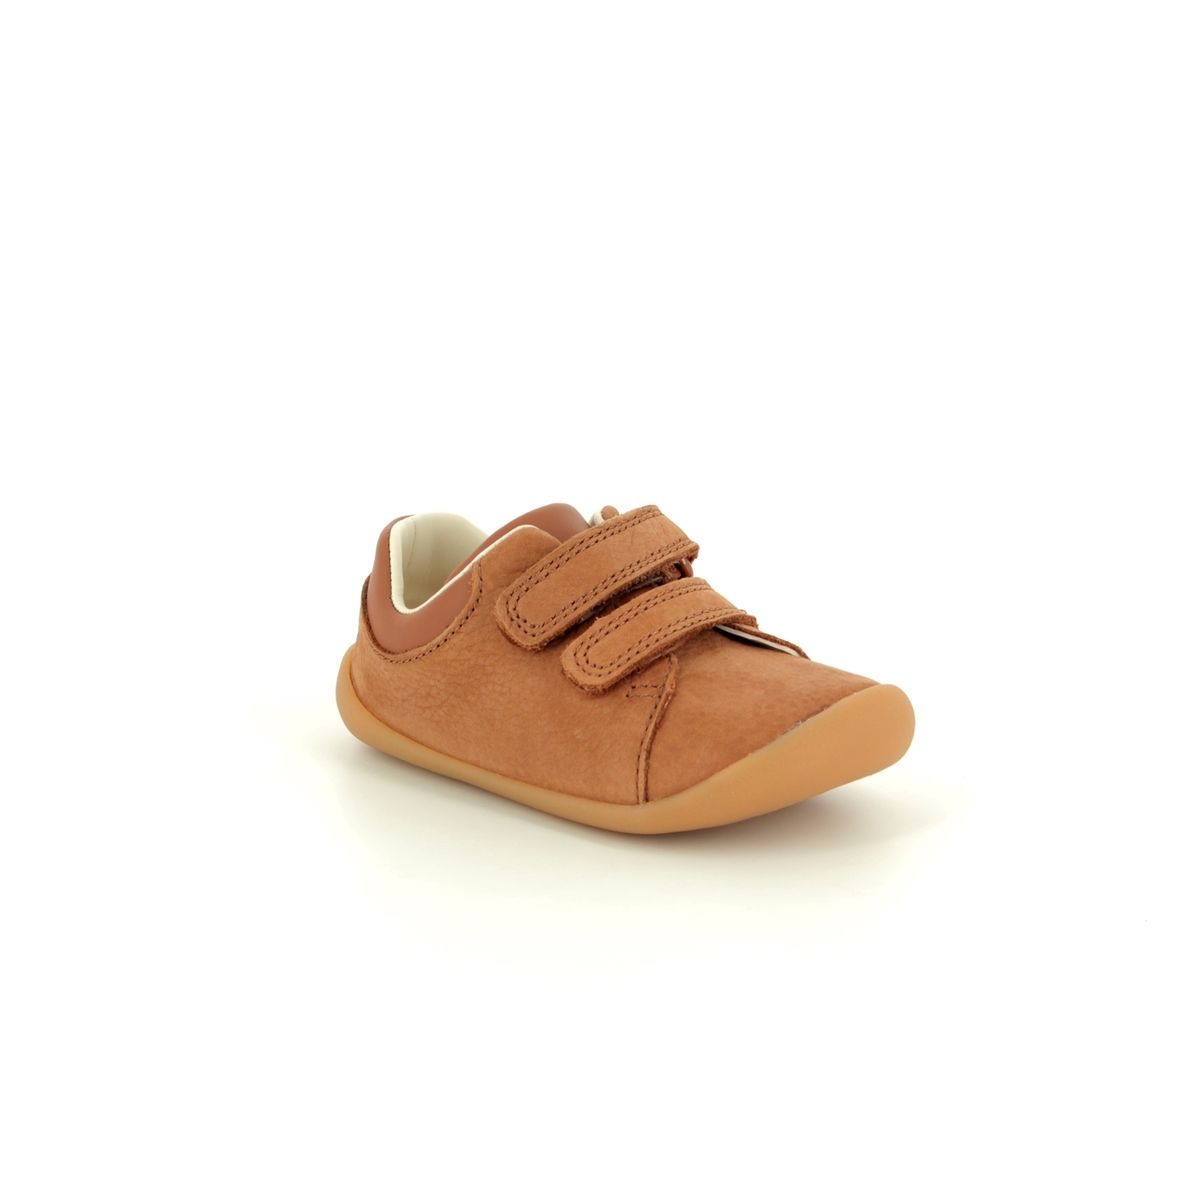 Clarks Roamer Craft T Tan Leather Kids Boys First Shoes 4229-06F in a Plain Leather in Size 5